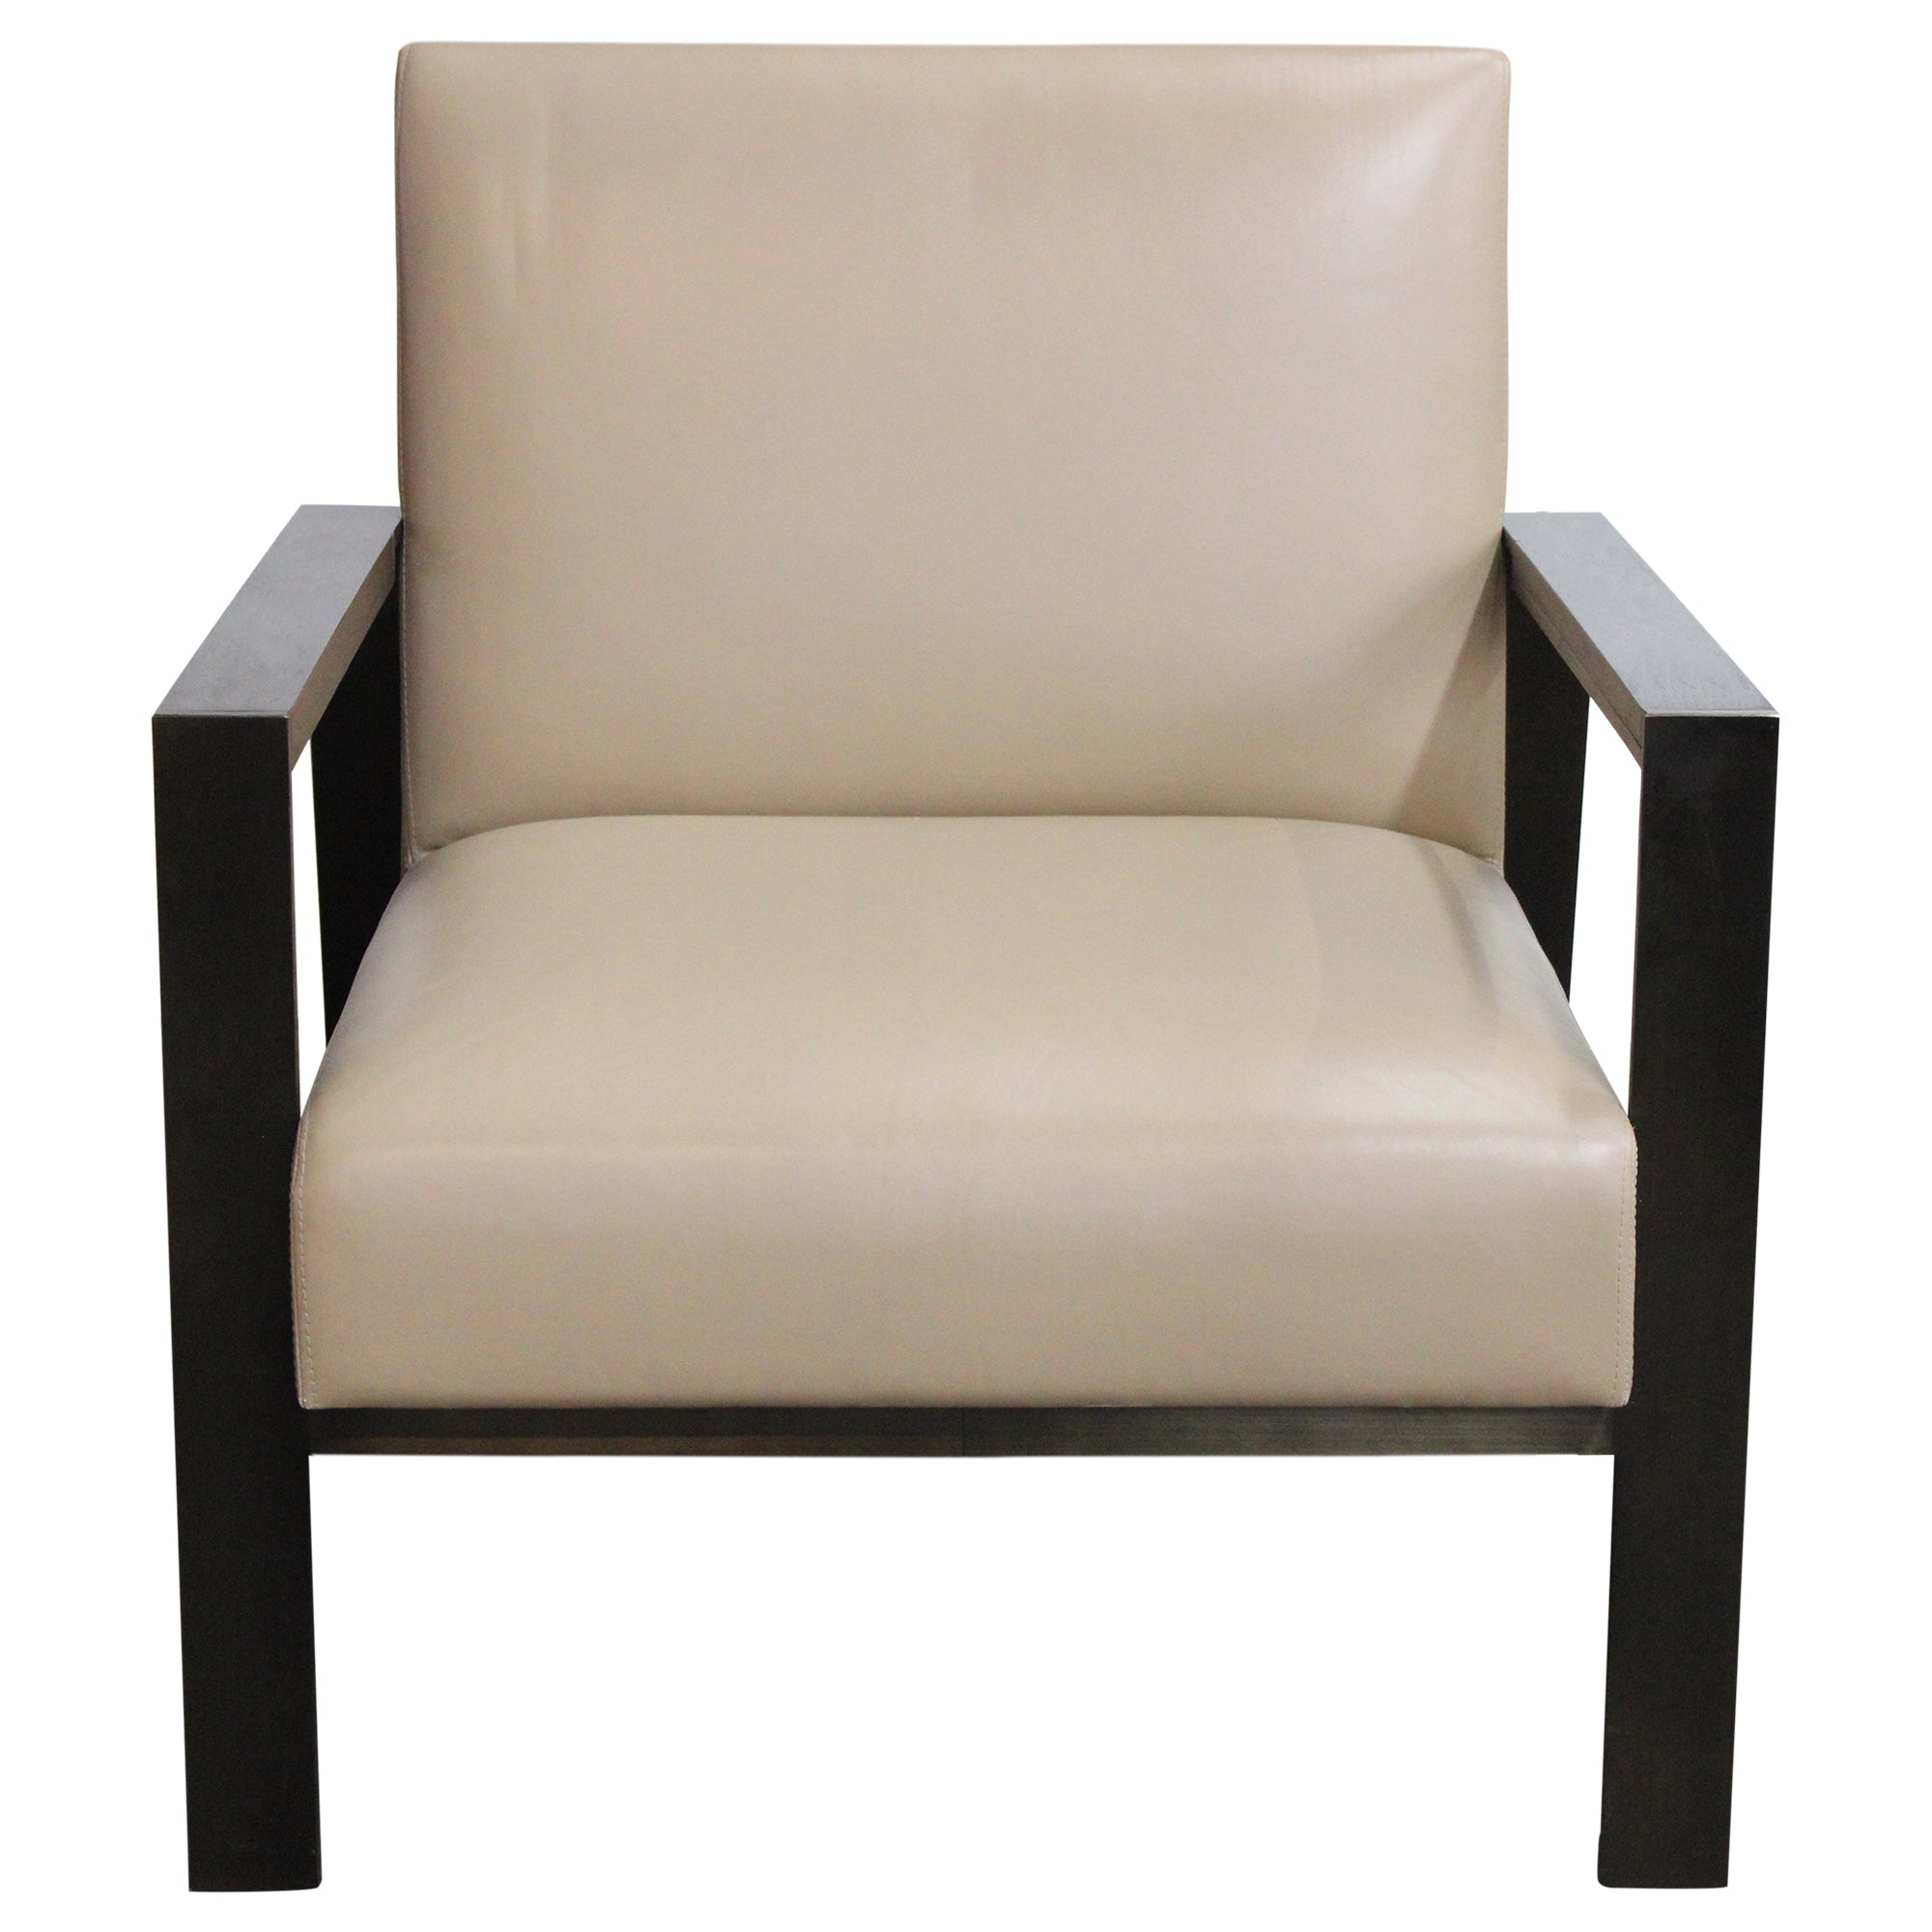 Holly Hunt New Linden Lounge Chair, Tan - Preowned CLOSEOUT